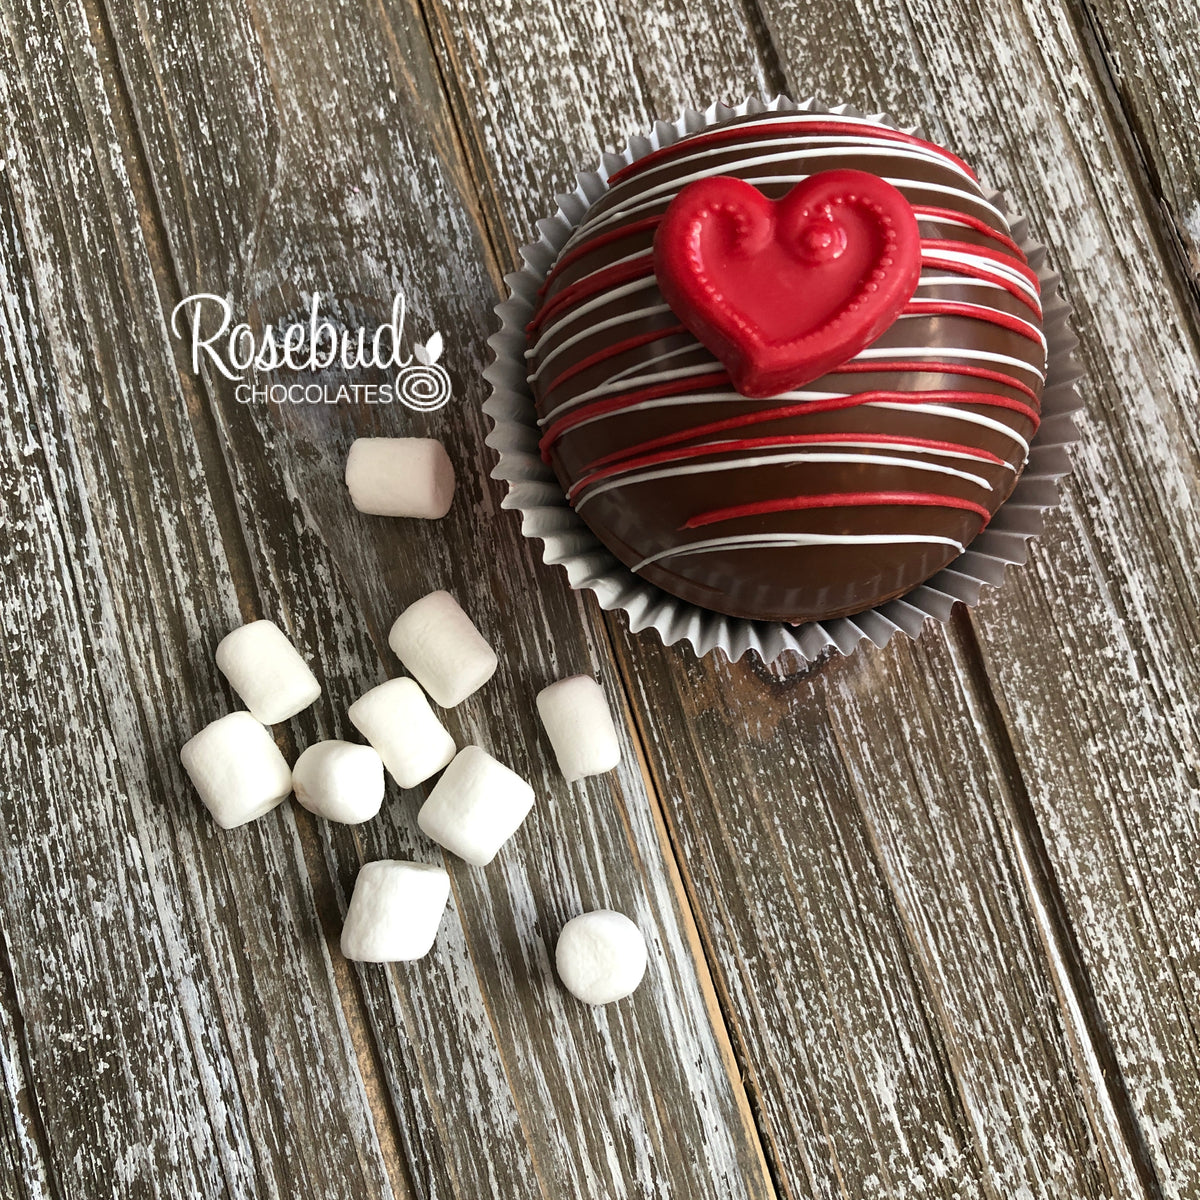 6+ Thousand Cocoa Marshmallow Hearts Royalty-Free Images, Stock